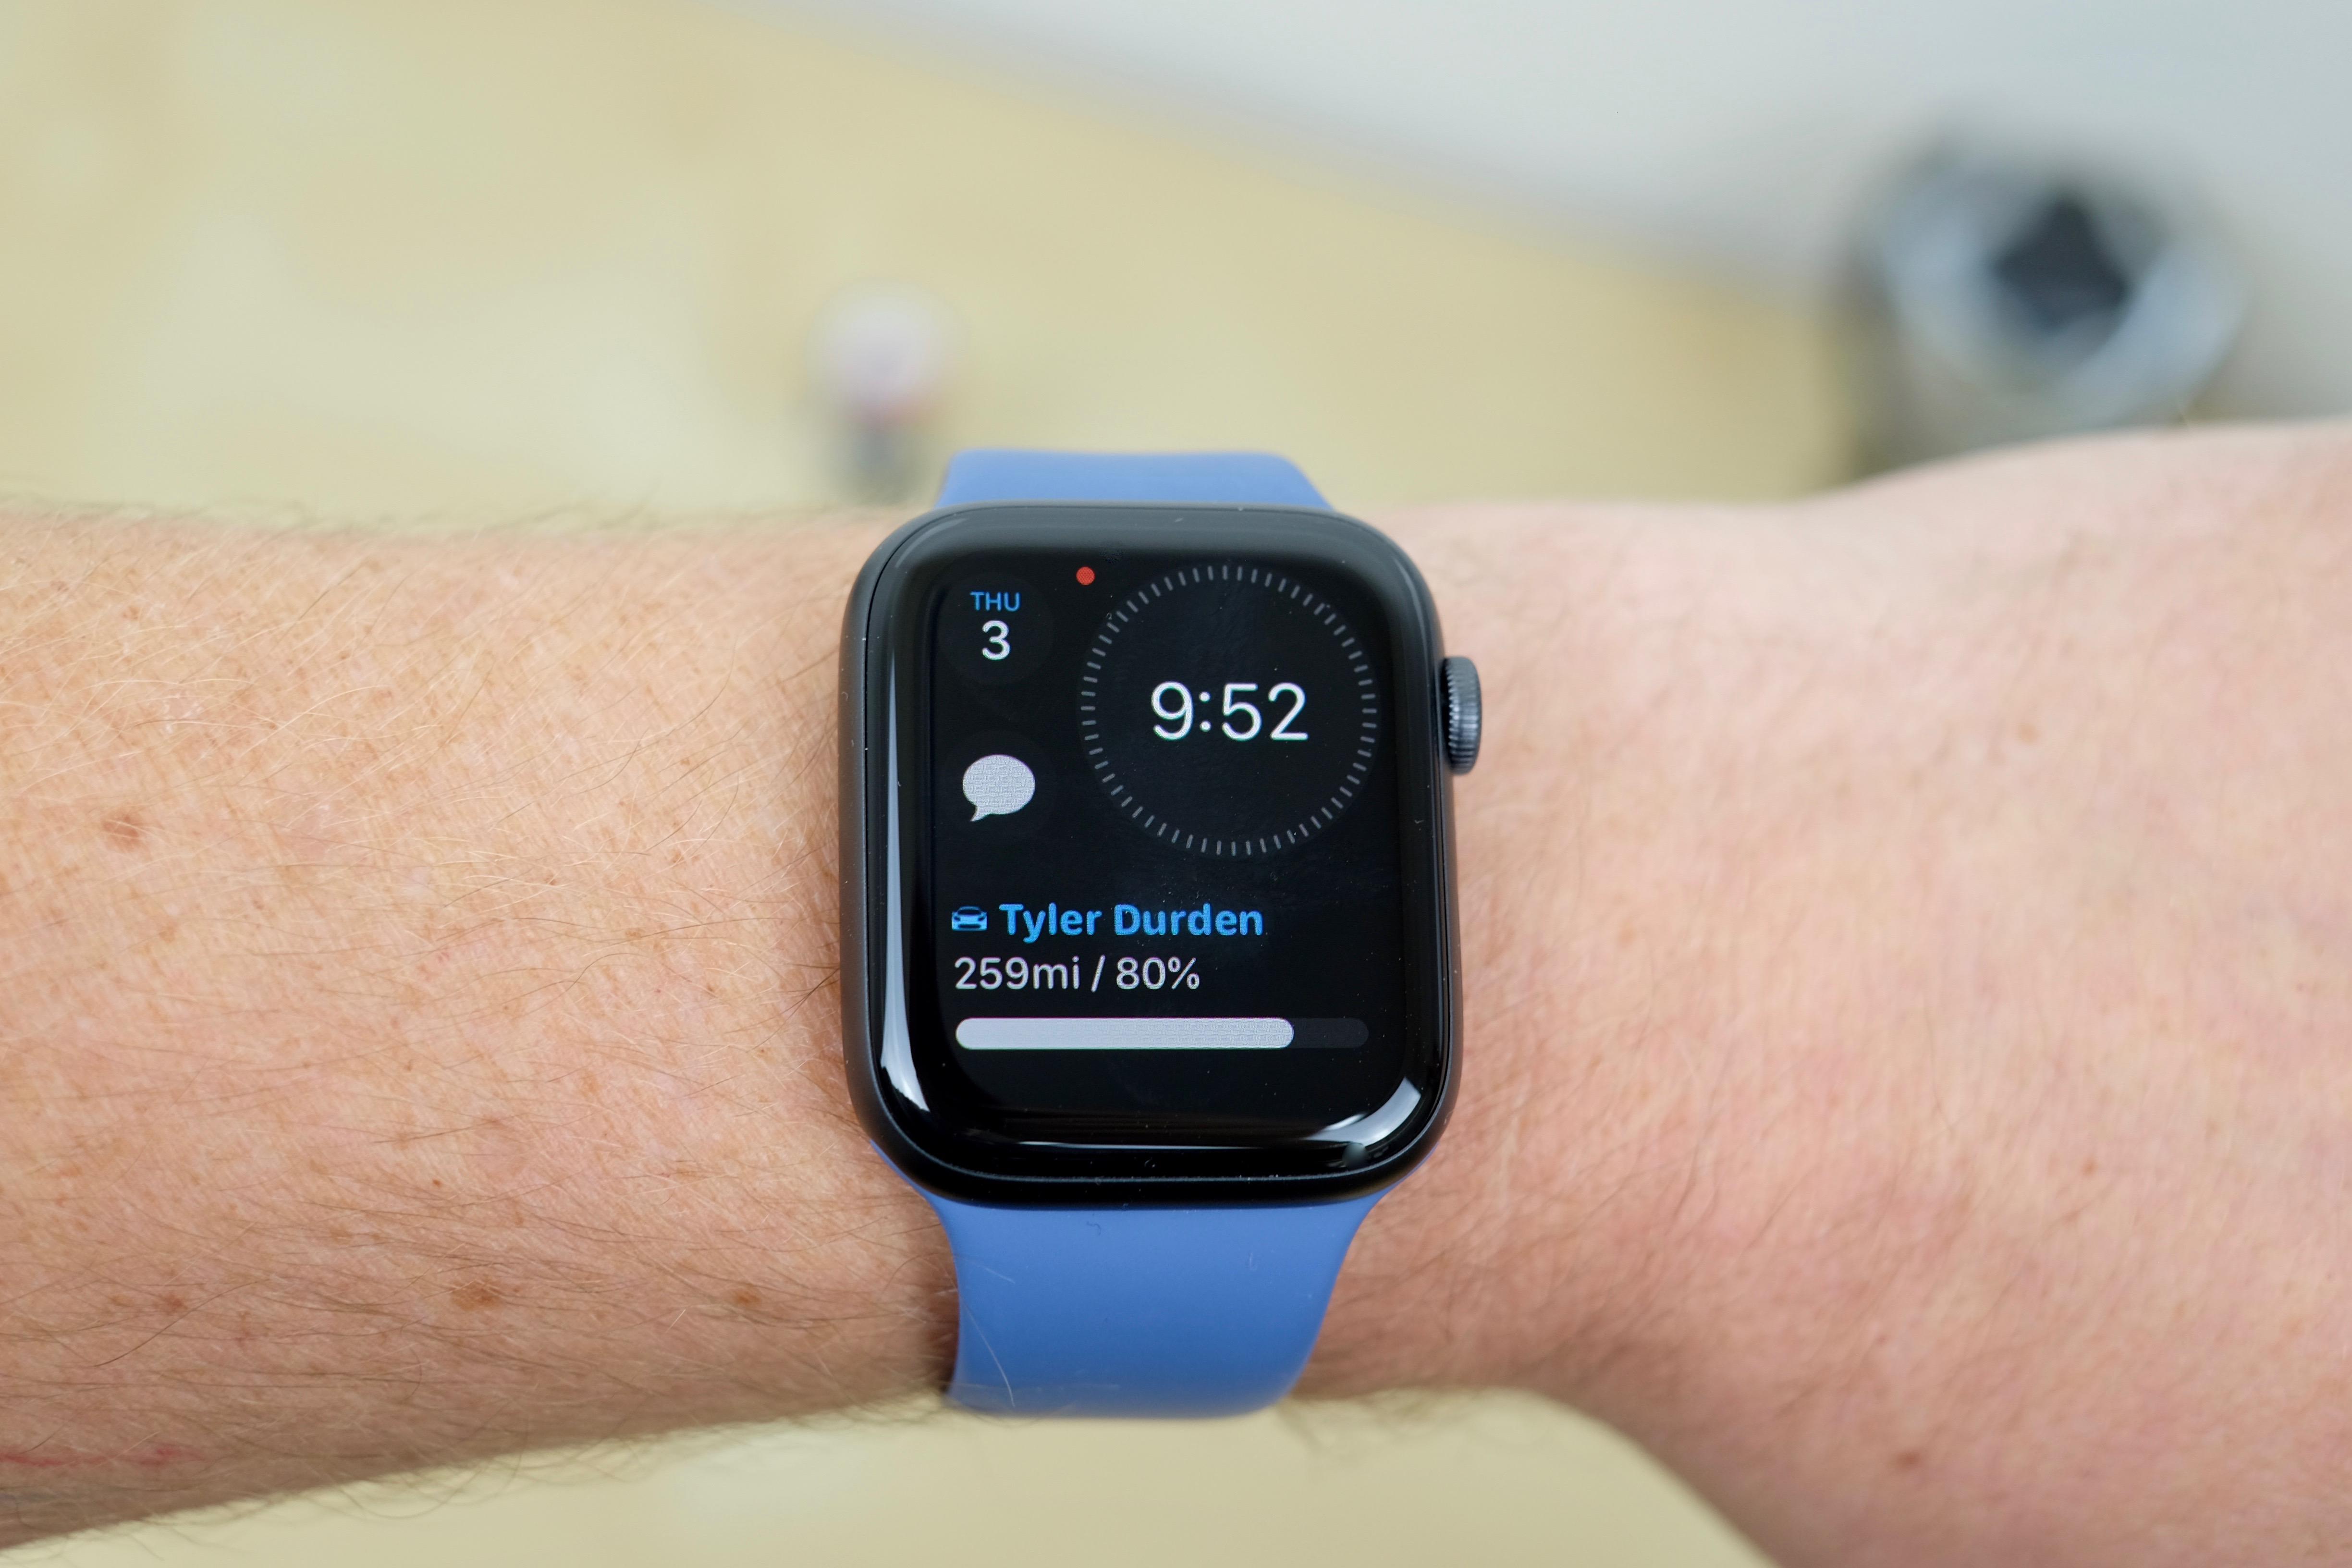 Apple Watch Series 5 review: This is the watch I've been waiting